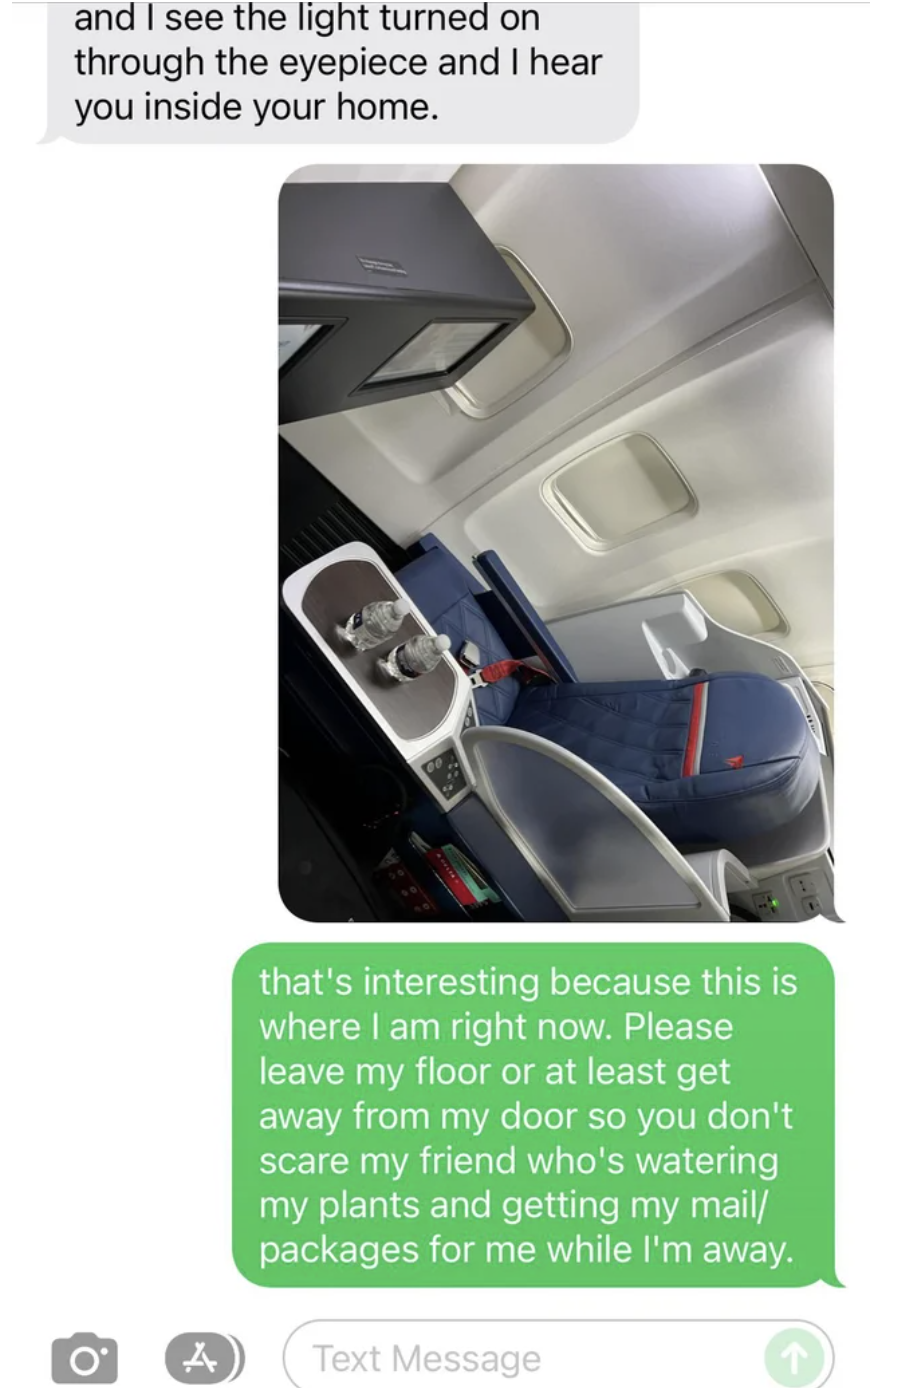 Text exchange ending with, &quot;that&#x27;s interesting because this is where I am right now. Please leave my floor or at least get away from my door so you don&#x27;t scare my friend who&#x27;s watering my plants and getting my mail/packages for me while I&#x27;m away.&quot;